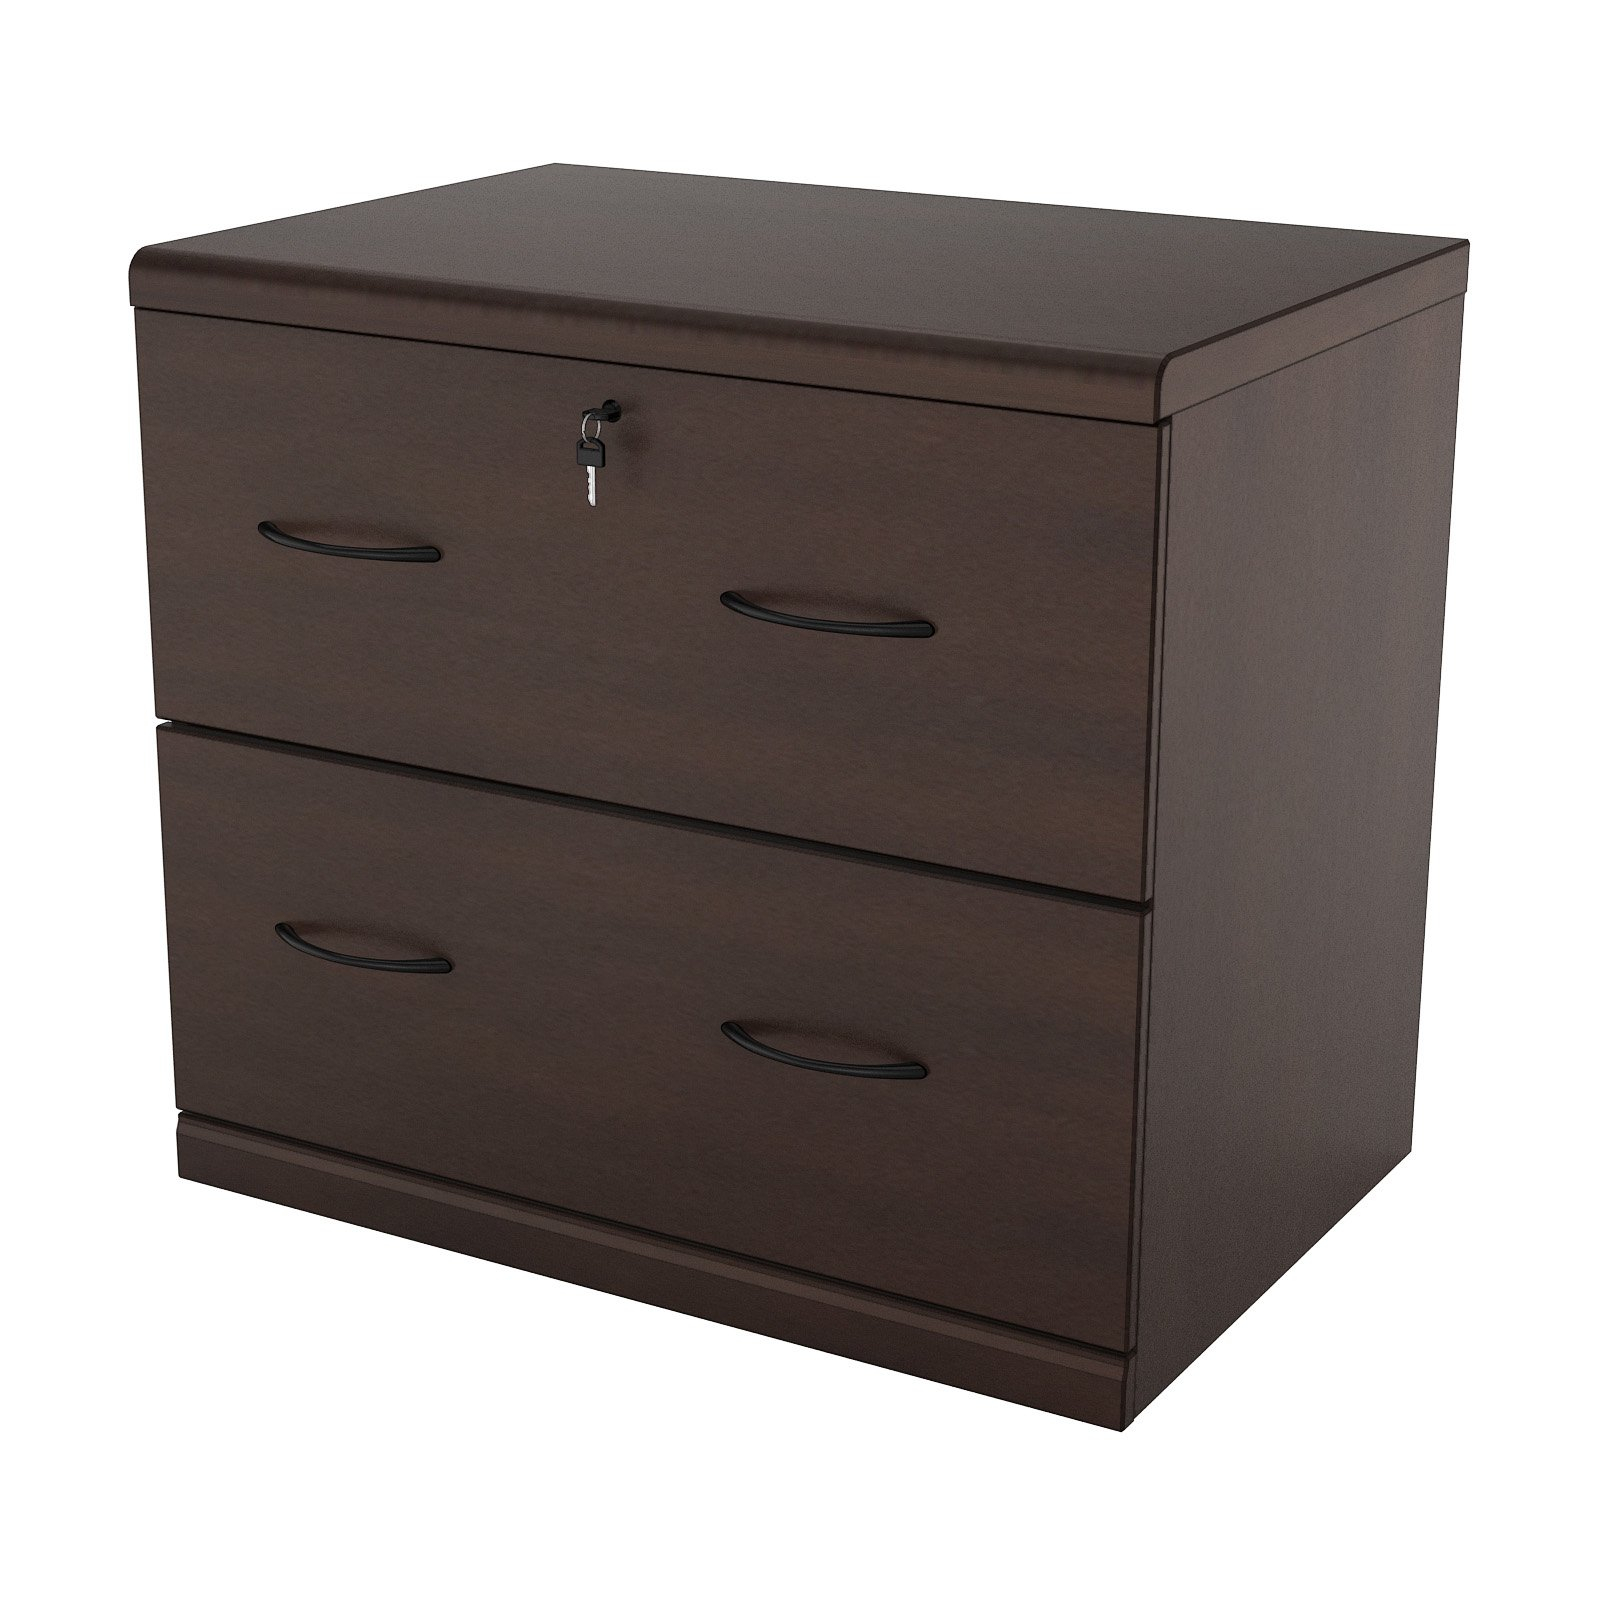 2 Drawer Lateral Wood Lockable Filing Cabinet Espresso Walmart intended for proportions 1600 X 1600